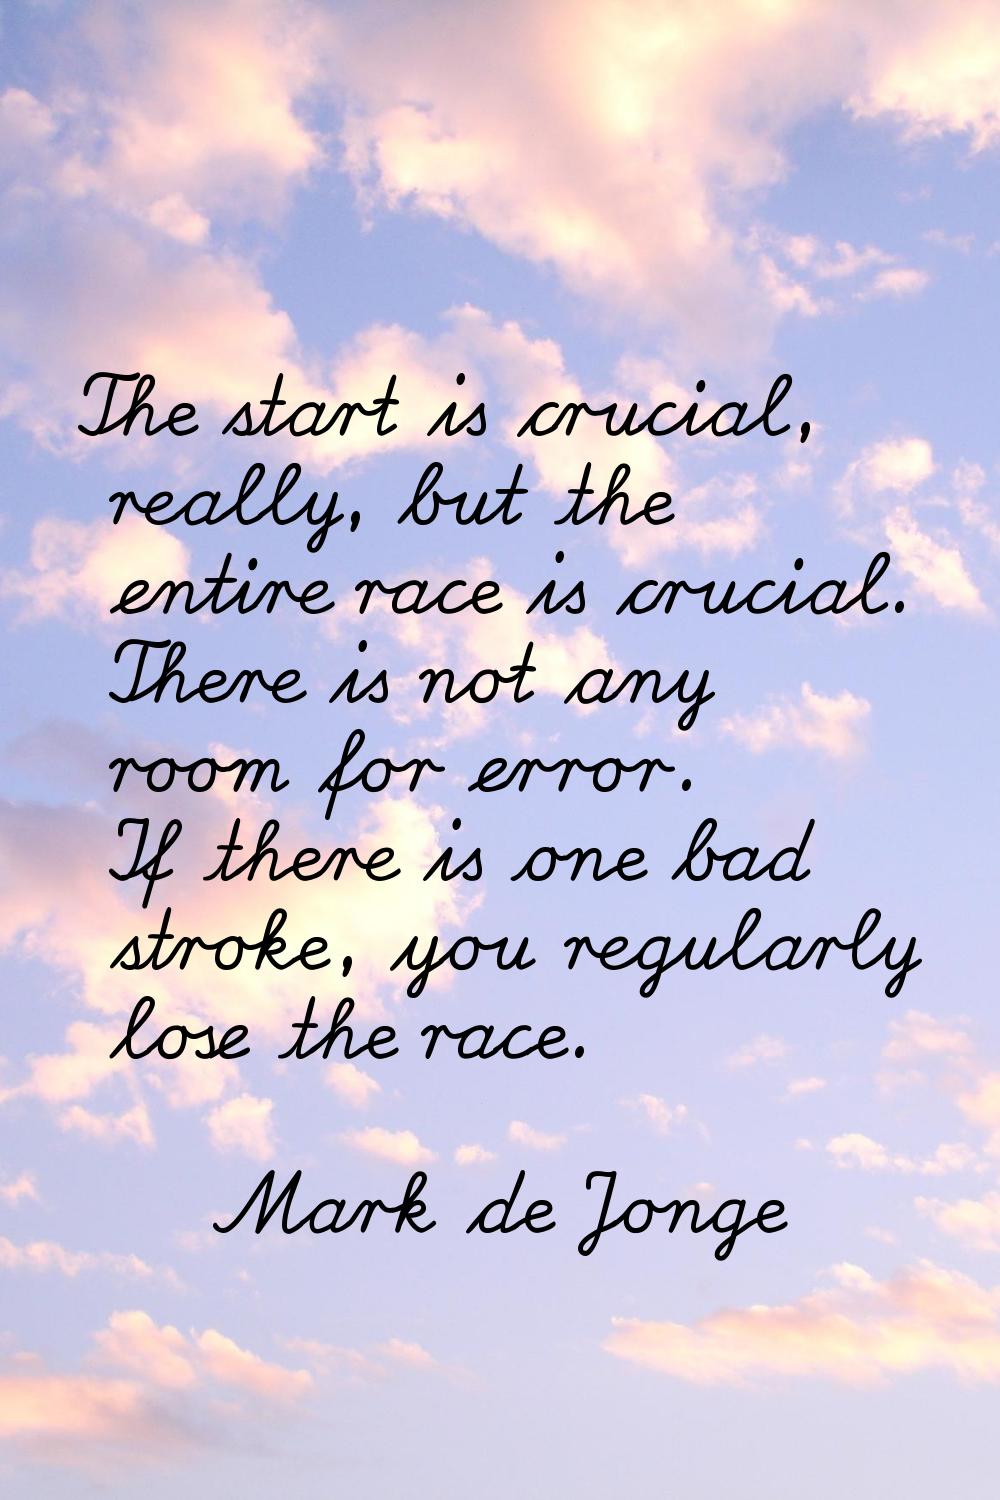 The start is crucial, really, but the entire race is crucial. There is not any room for error. If t